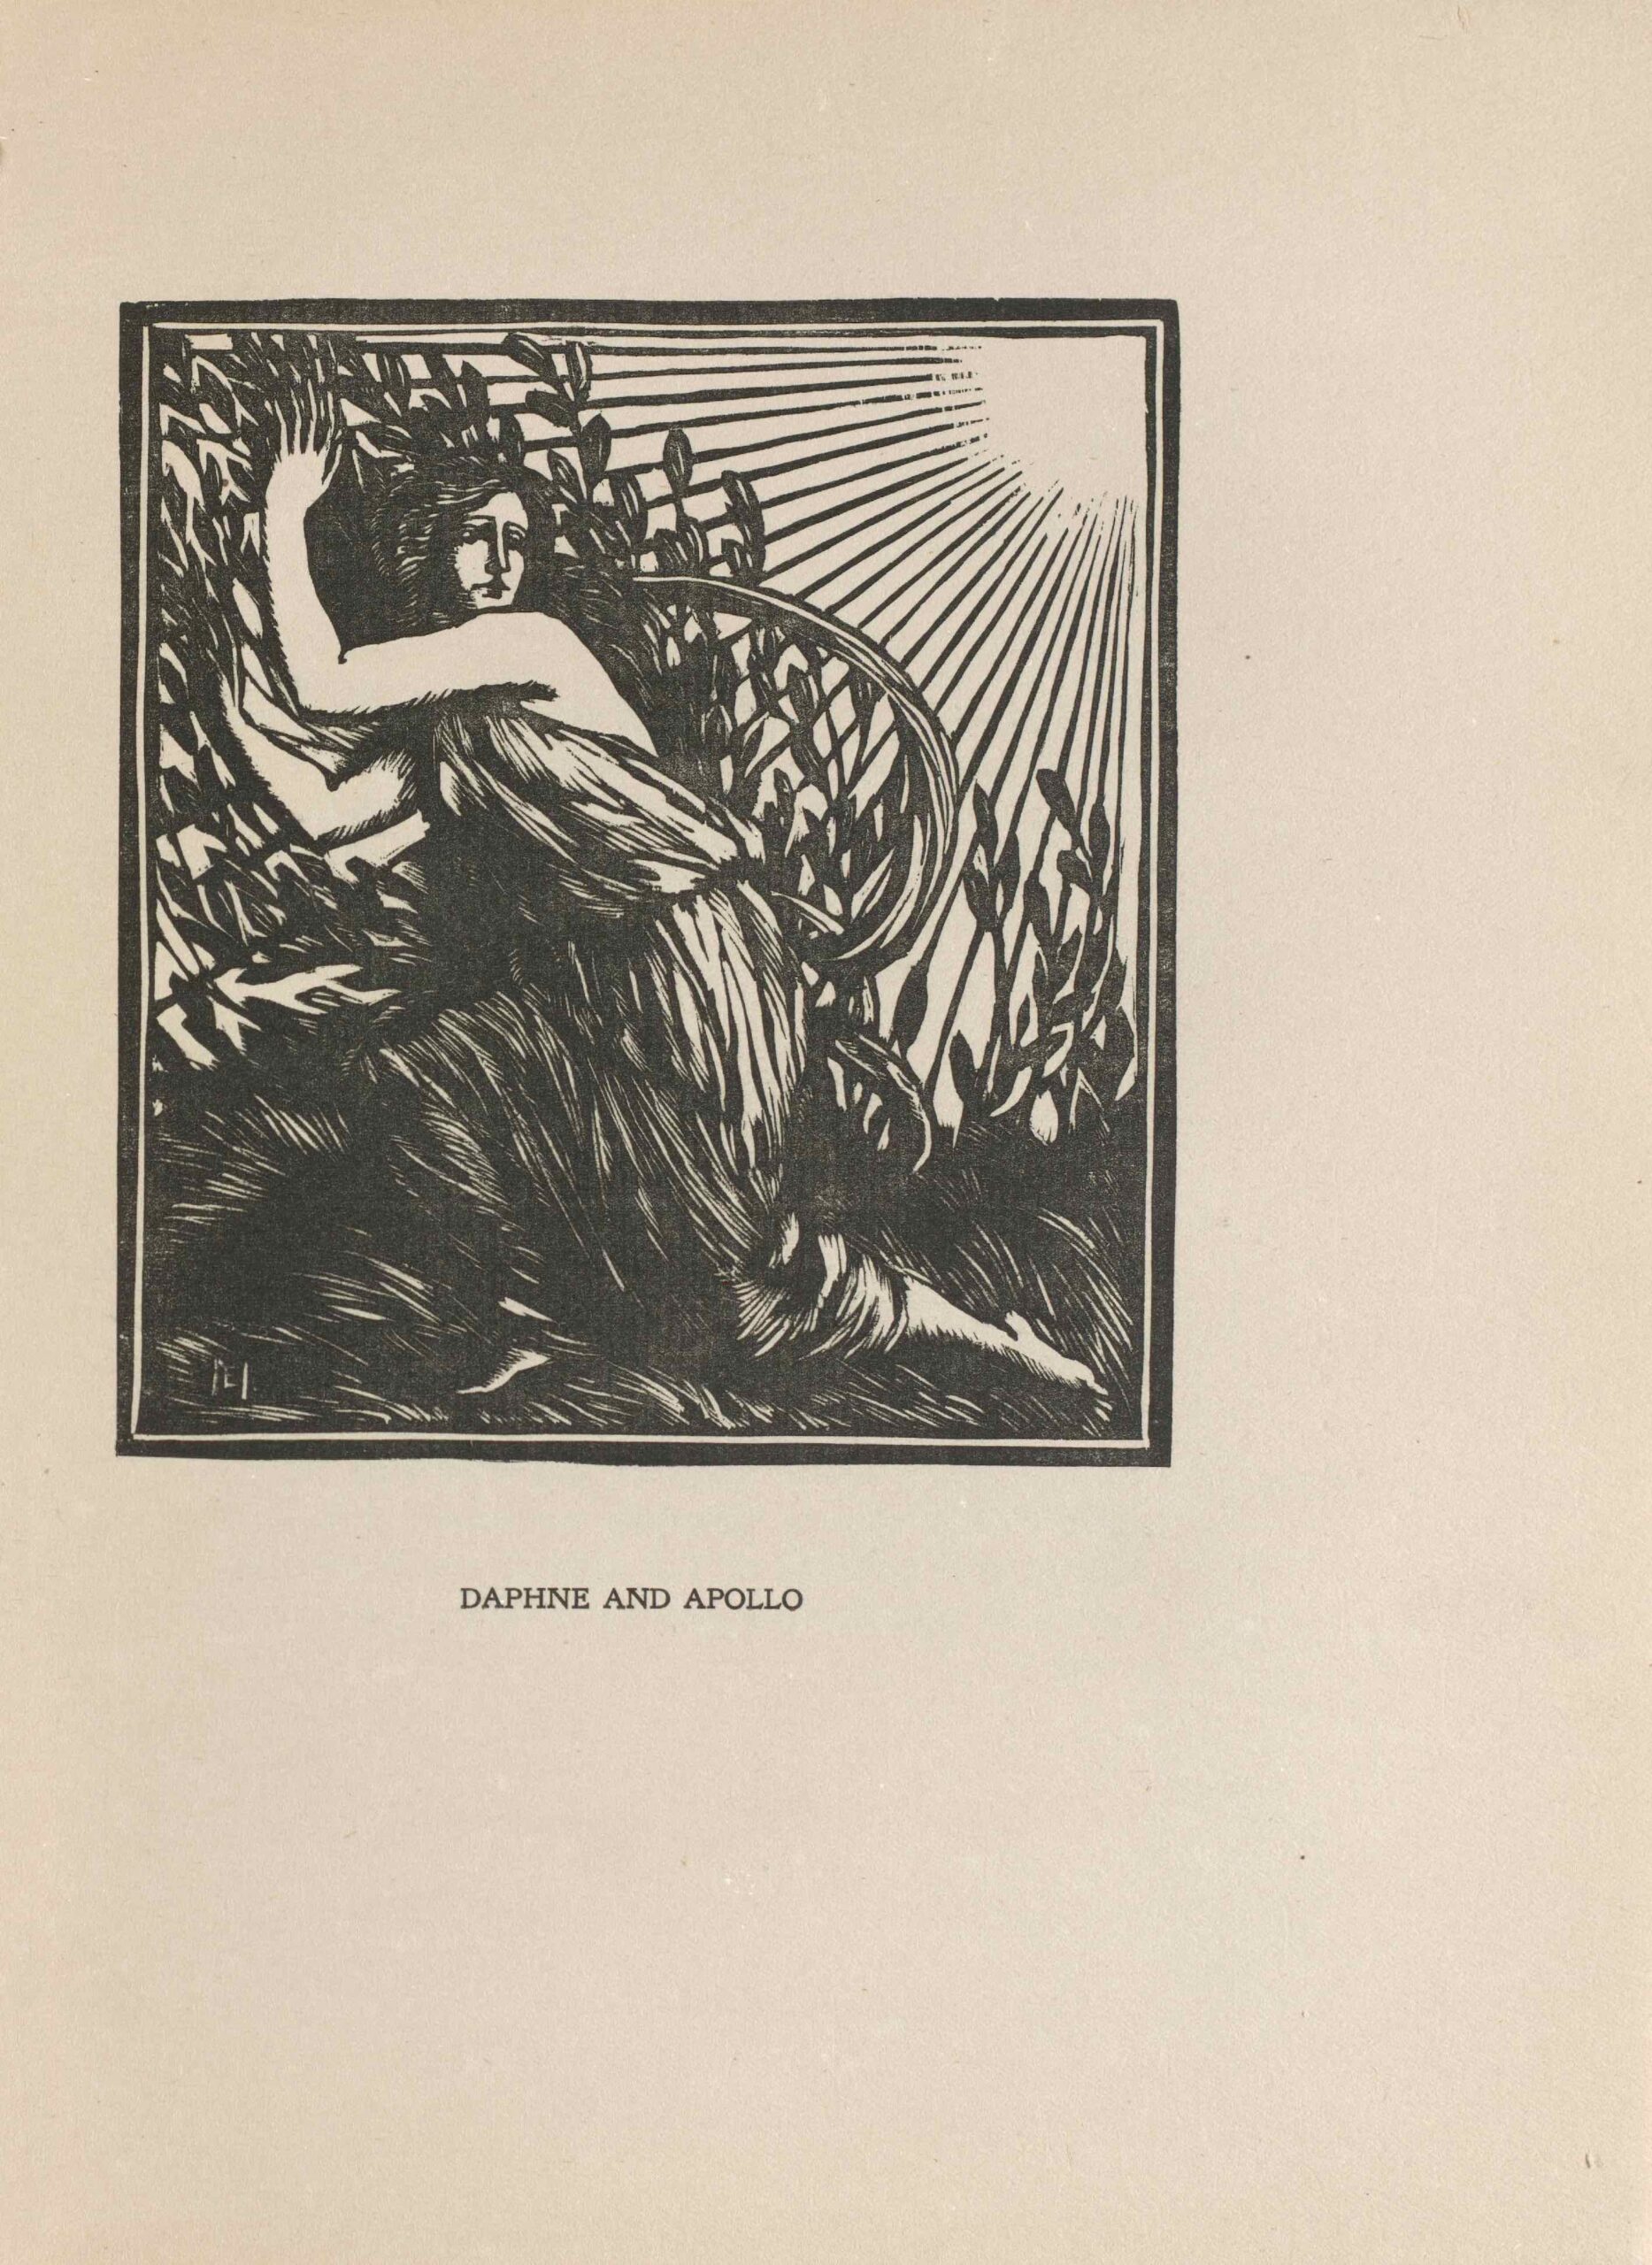 The image is in portrait orientation and is centered on the page within a rectilinear border. The image printed in black. In the foreground, a woman [the nymph, Daphne] is kneeling on a bed of long plants and is looking over her shoulder to the right. Her body remains facing the left. She is next to a field of tall plants and shrubs full of leaves, likely laurel bushes. The woman’s arms and hands are held upwards around her eye-level and are reaching into the field. She is draped in a loose fabric, but her arms, neck, face, and feet are exposed. The sun is represented by a blank, circular space in the top right of the image. Sun rays are shining down onto the field and the woman, evident by the shadow on her face. According to the myth, the sun is the god Apollo.